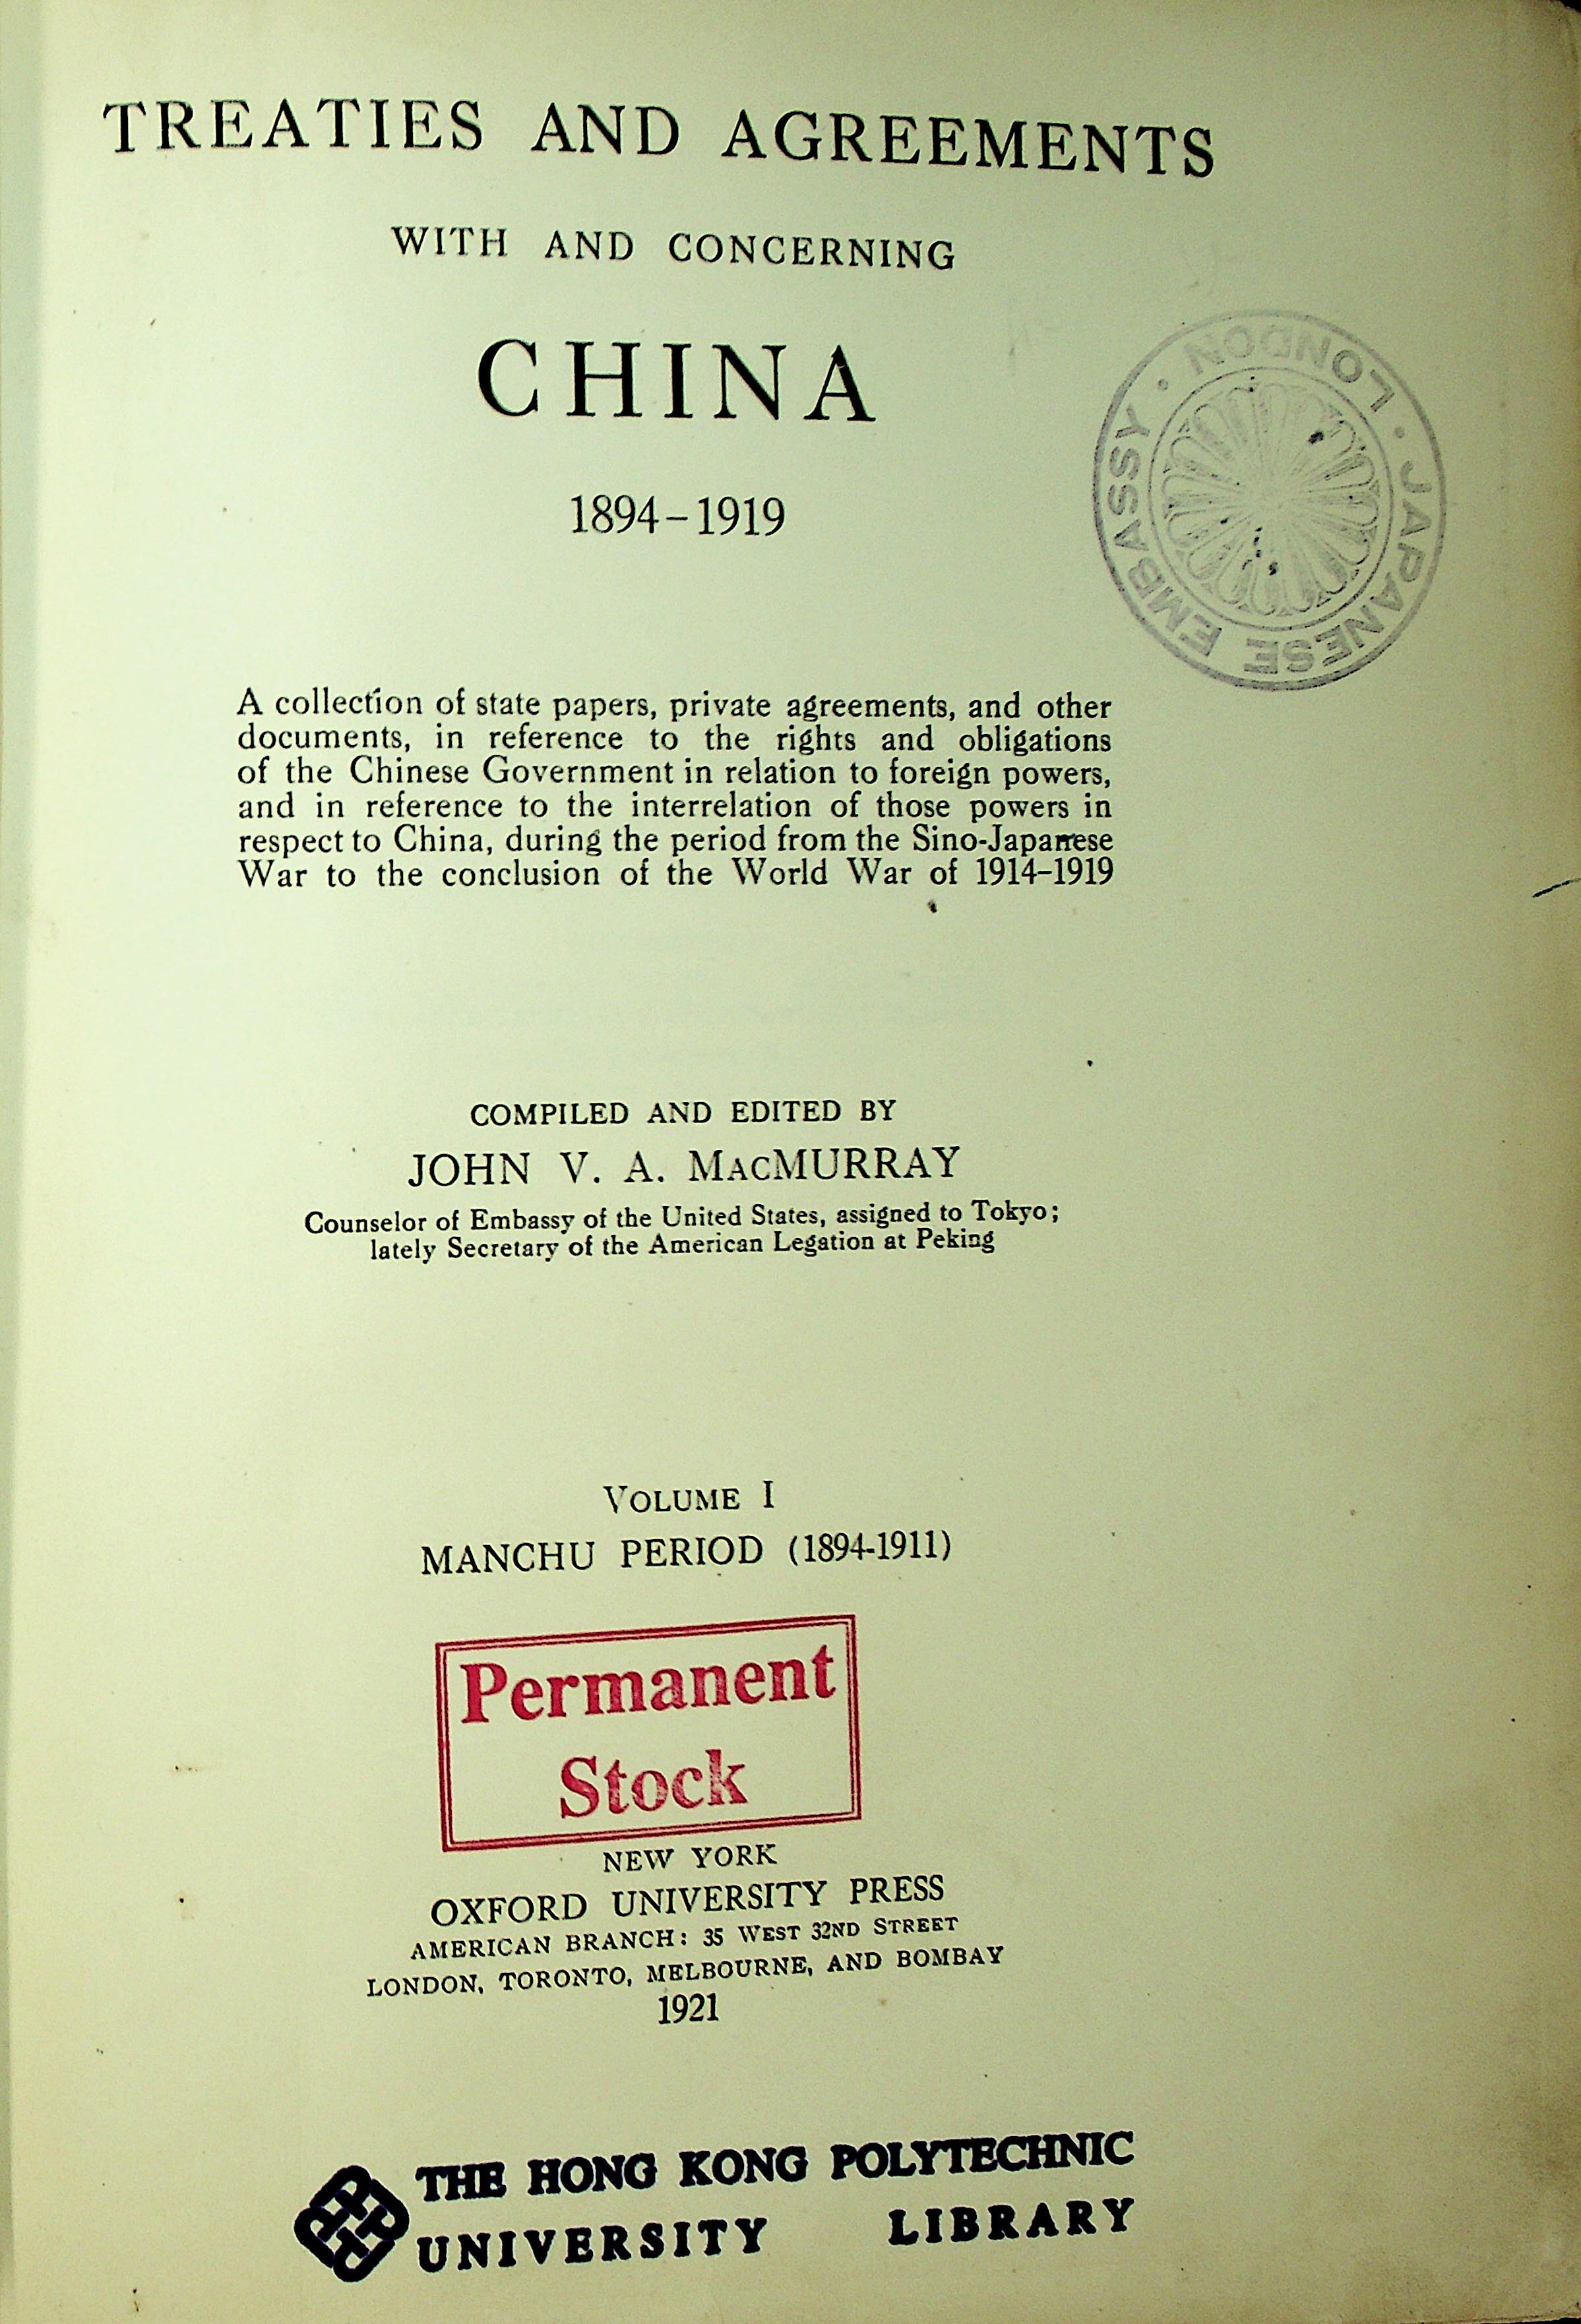 Treaties and agreements with and concerning China, 1894-1919 : a collection of state papers, private agreements, and other documents, in reference to the rights and obligations of the Chinese Government in relation to foreign powers, and in reference to the interrelation of those powers in respect to China, during the period from the Sino-Japanese War to the conclusion of the World War of 1914-1919. Volume 1